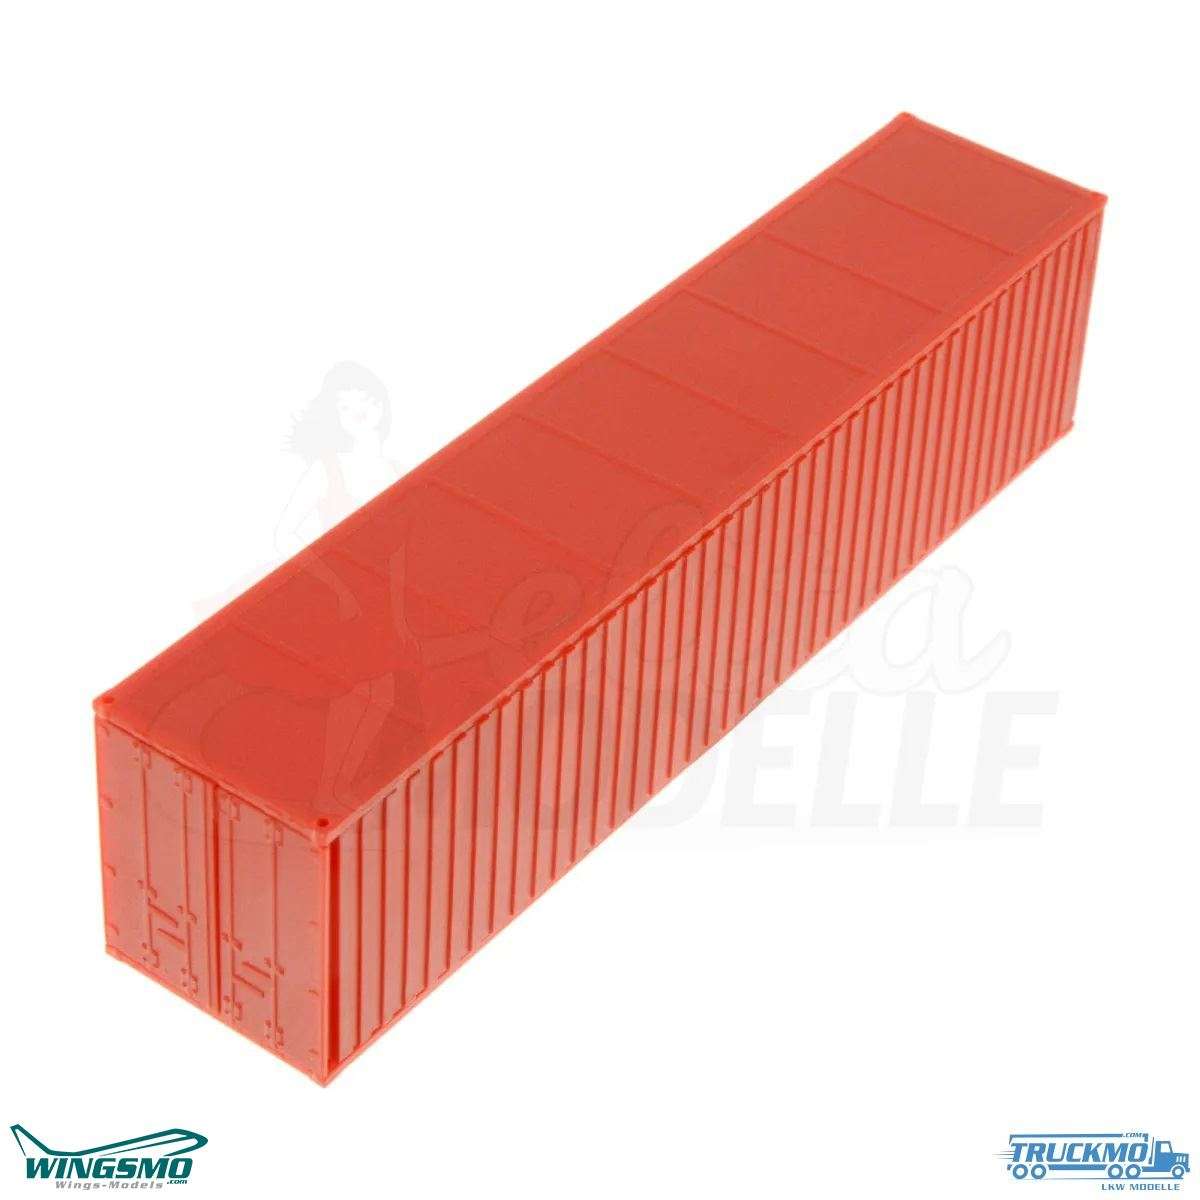 Elita Colours Accessories H0 container 40FT. Red kit